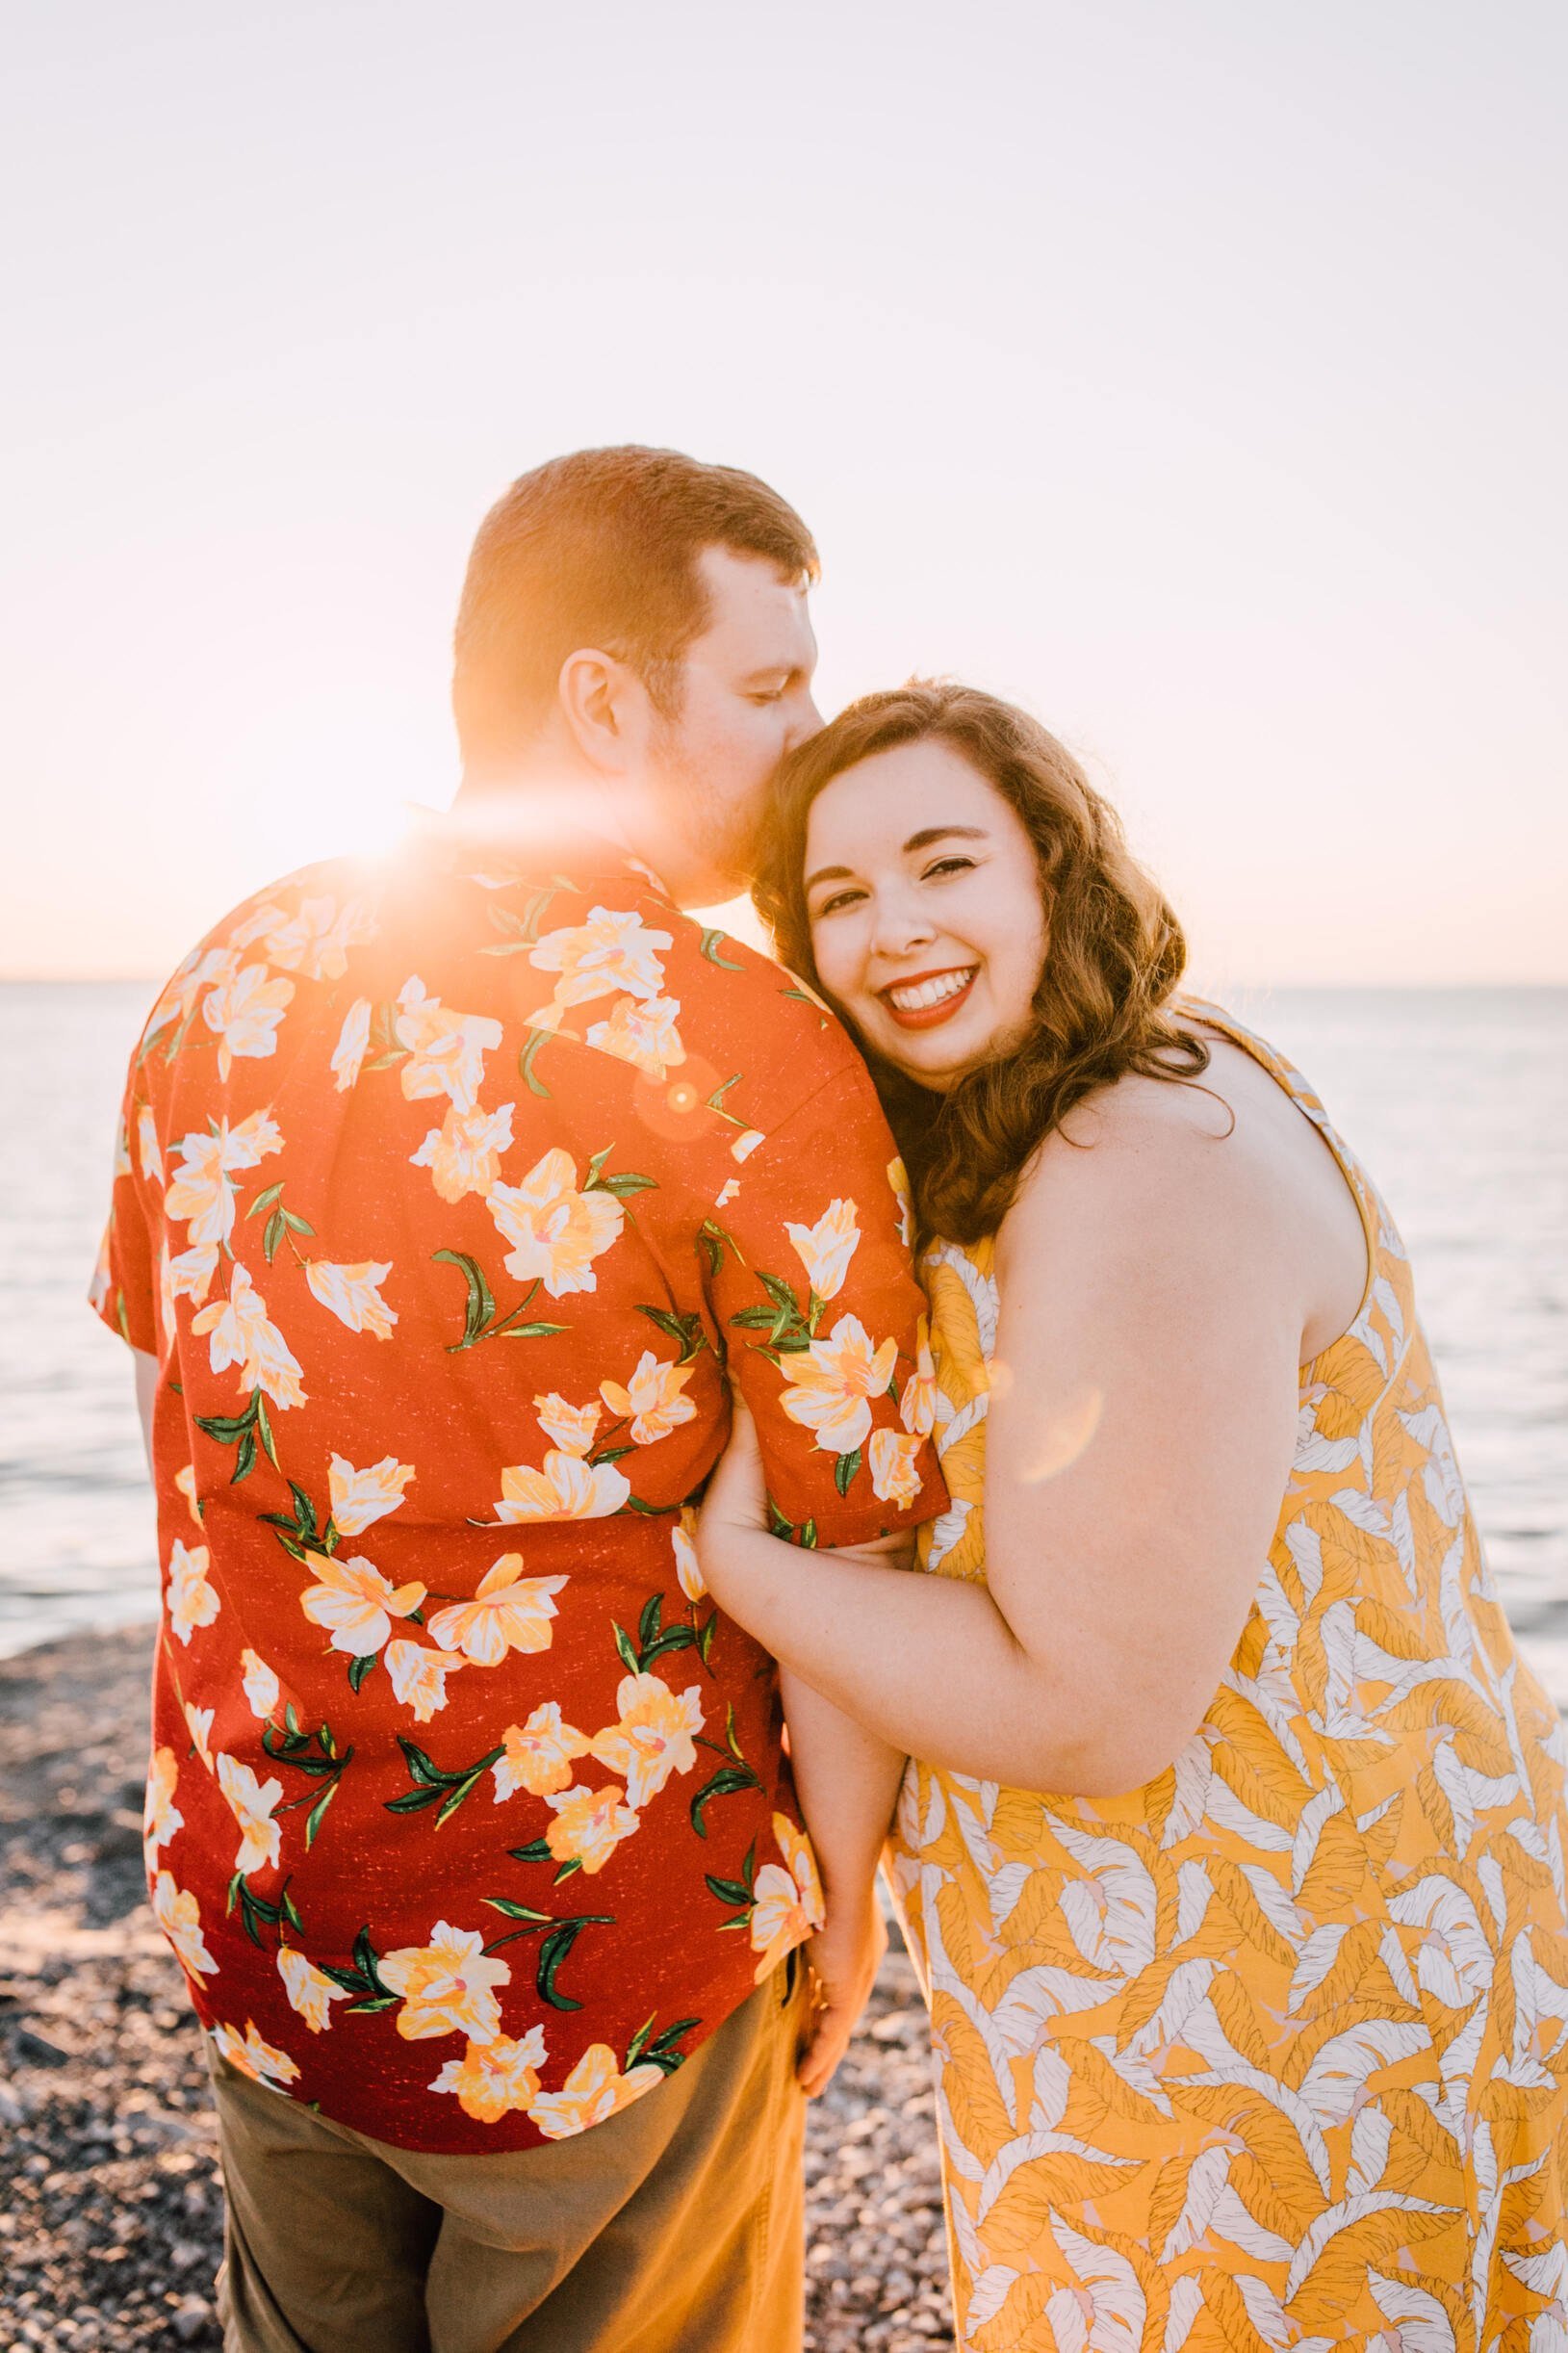  Brandon kisses the top of his fiancé’s head as she gazes over her shoulder with a wide smile. This example of lakefront photography is taken on the rocky shore of Lake Ontario 